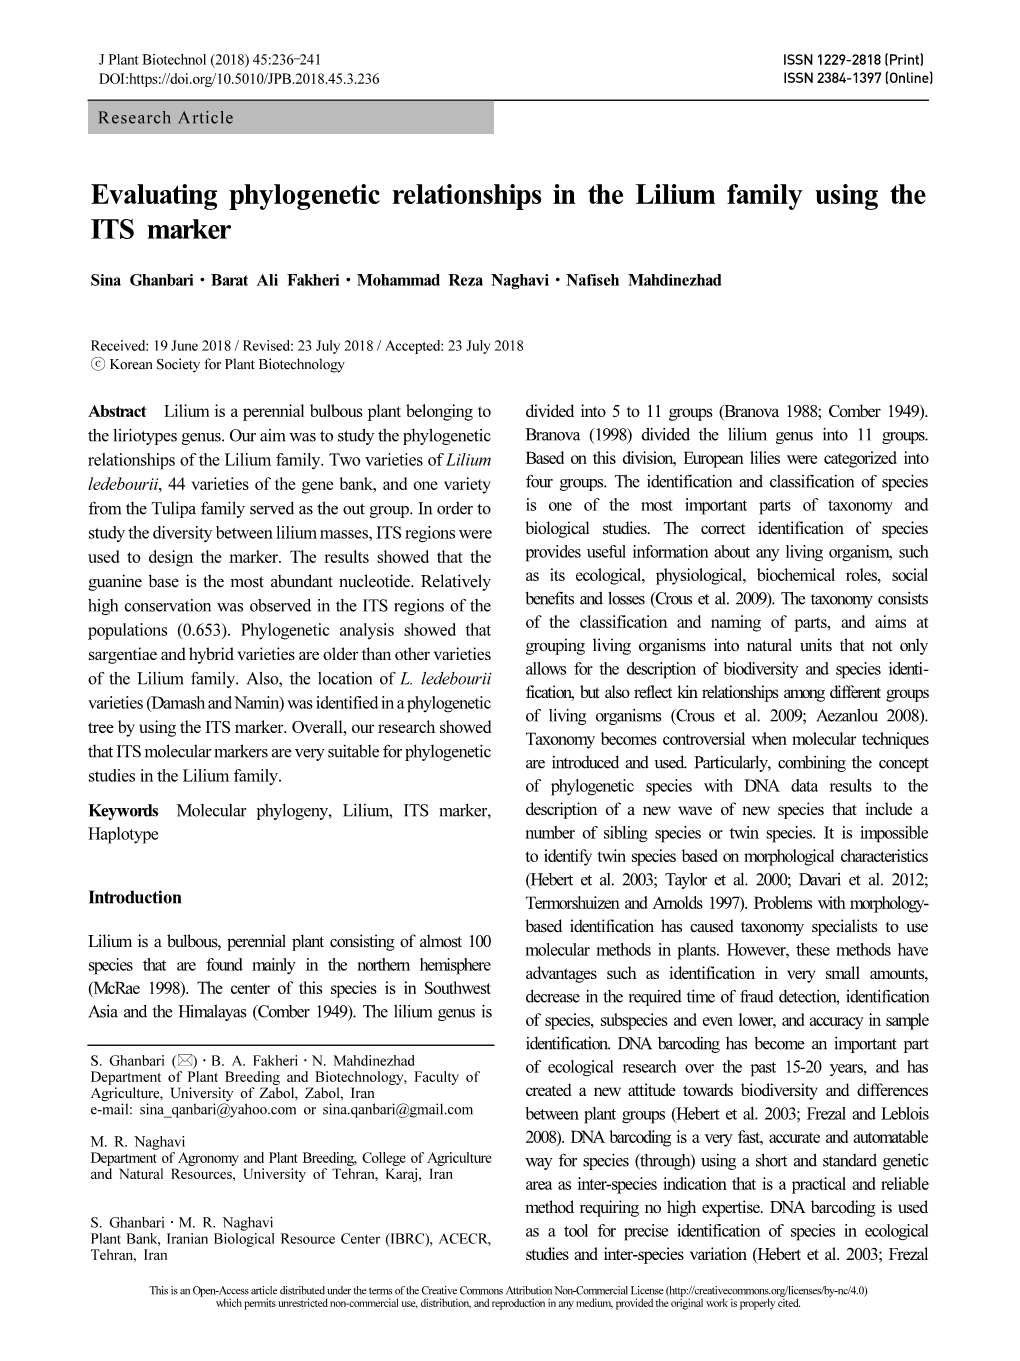 Evaluating Phylogenetic Relationships in the Lilium Family Using the ITS Marker